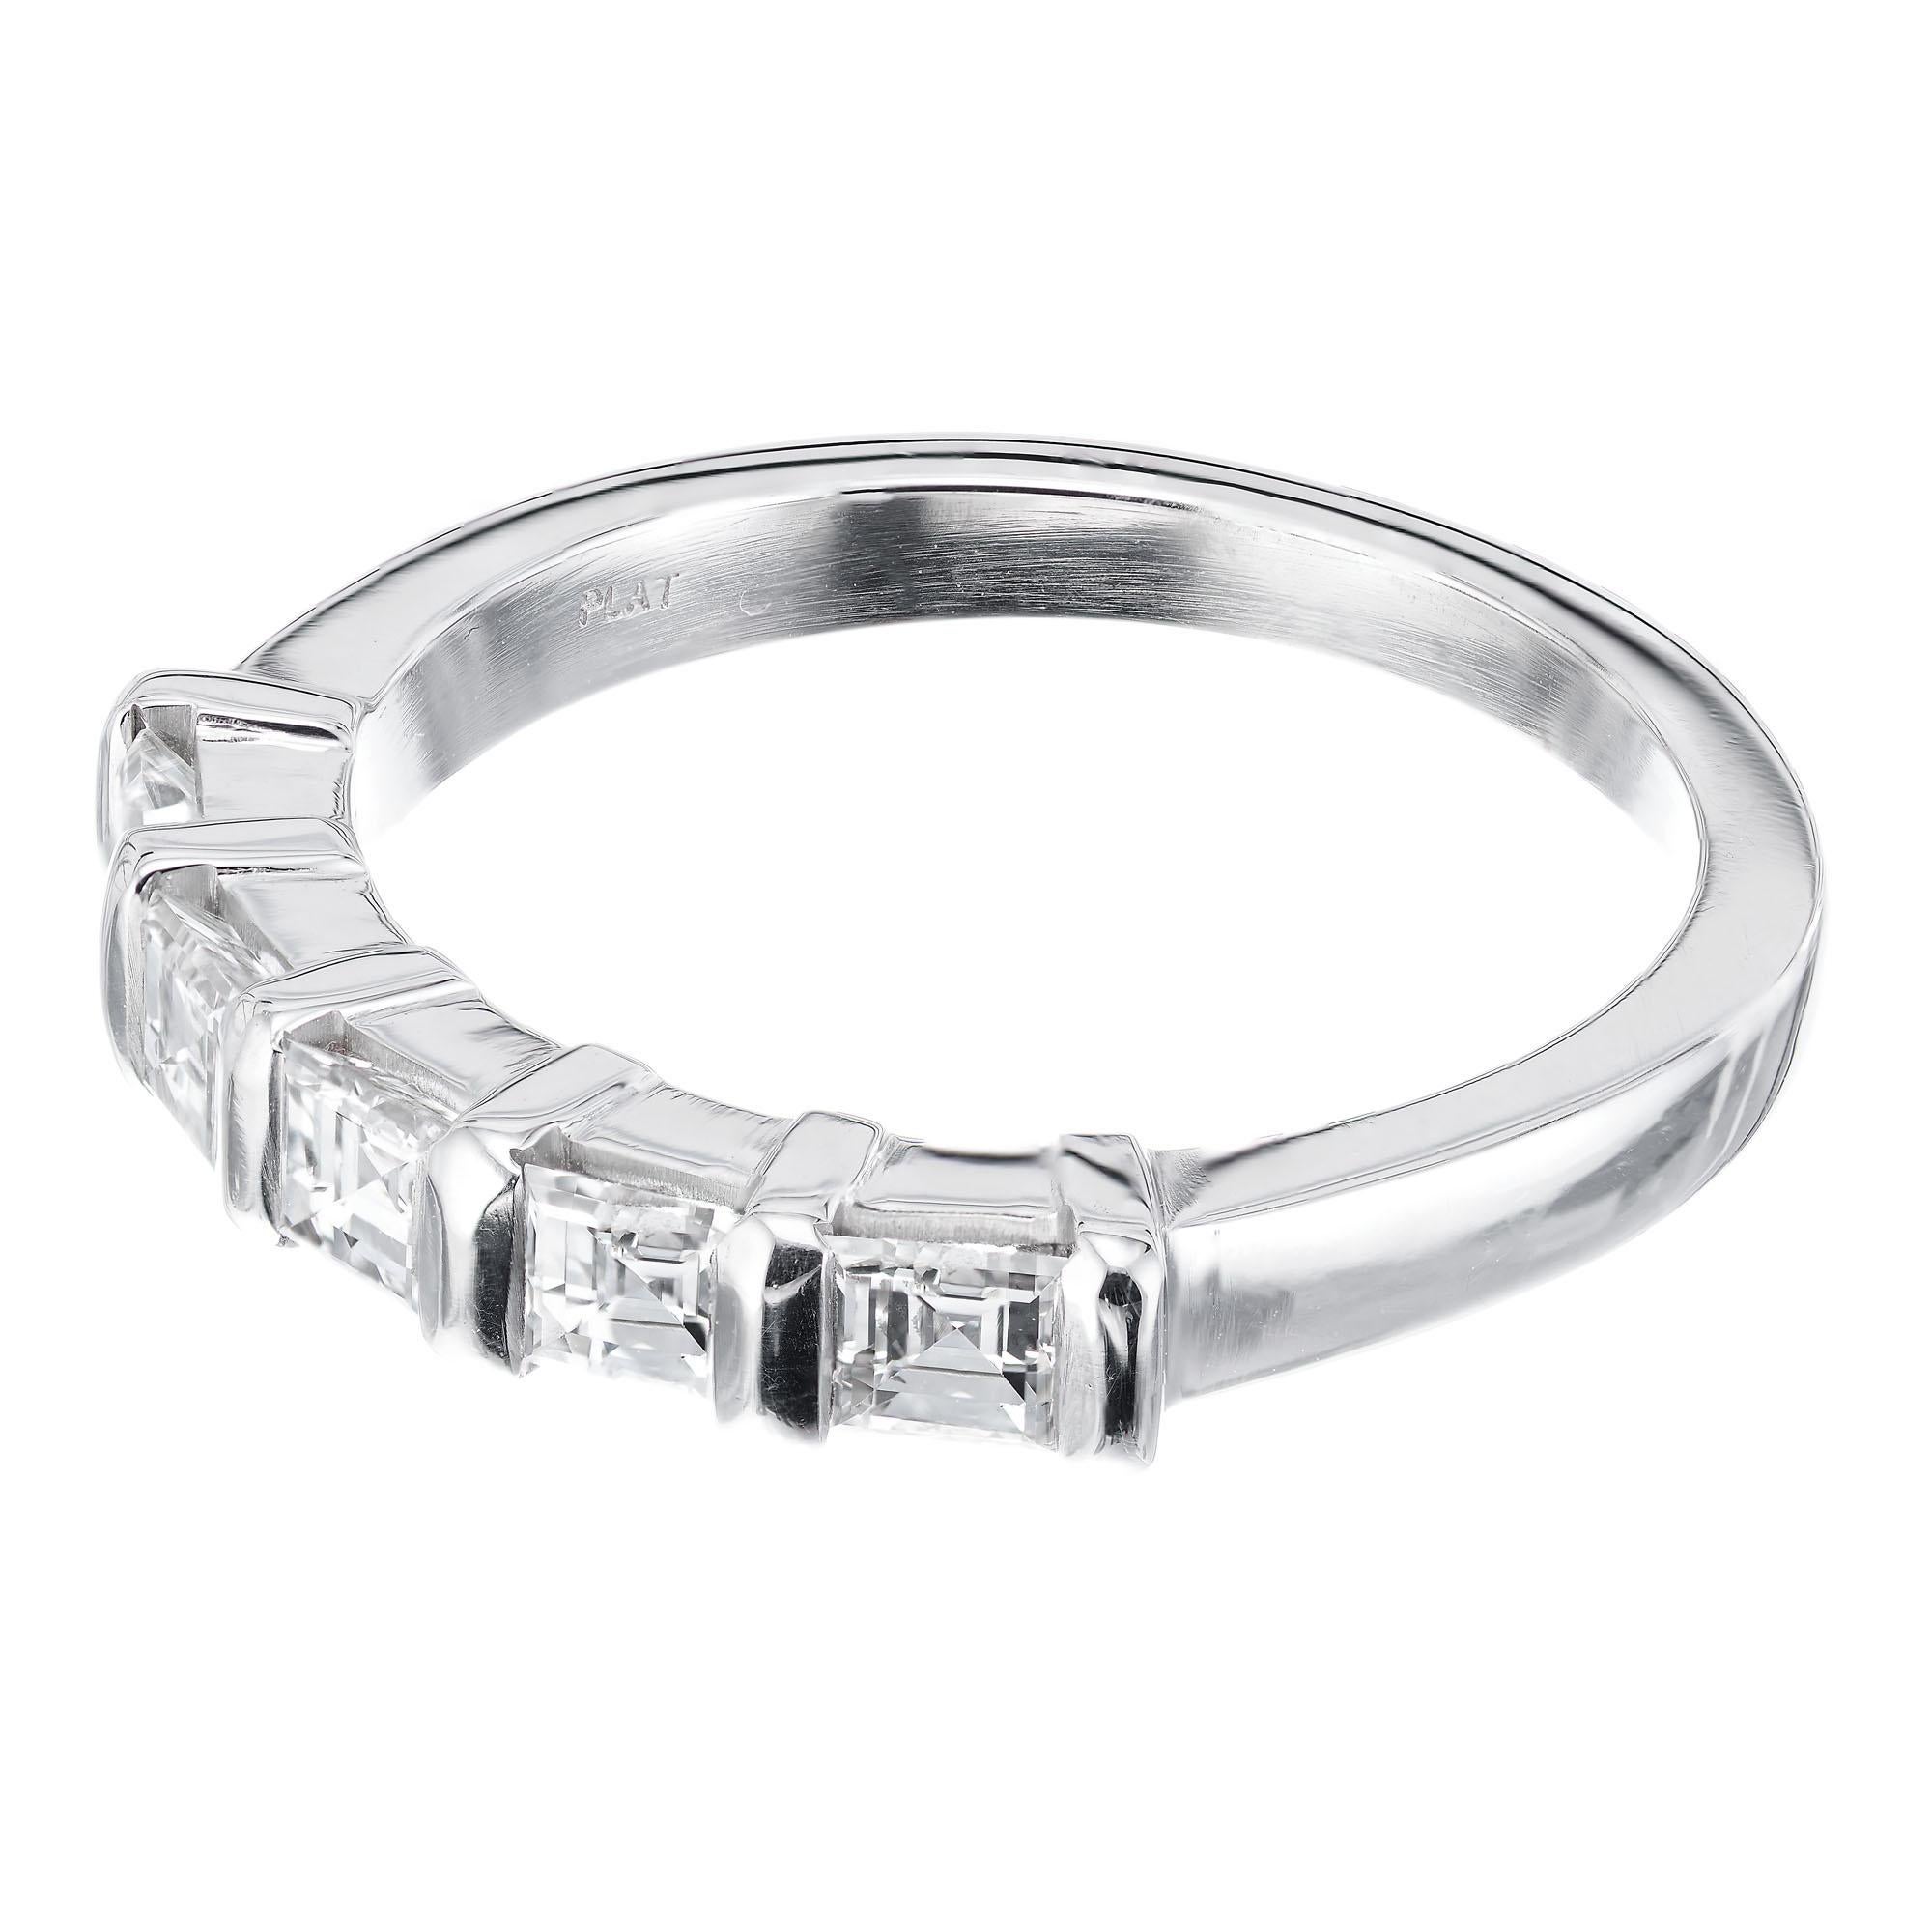 Square step cut 5 diamond simple strong bar set wedding band, in platinum.  Made in the Peter Suchy Workshop.

5 square emerald step cut diamonds G, VS approx. .76ct
Size 6 and sizable
Platinum 
Stamped: PLAT
5.4 grams
Width at top: 3.48mm
Height at